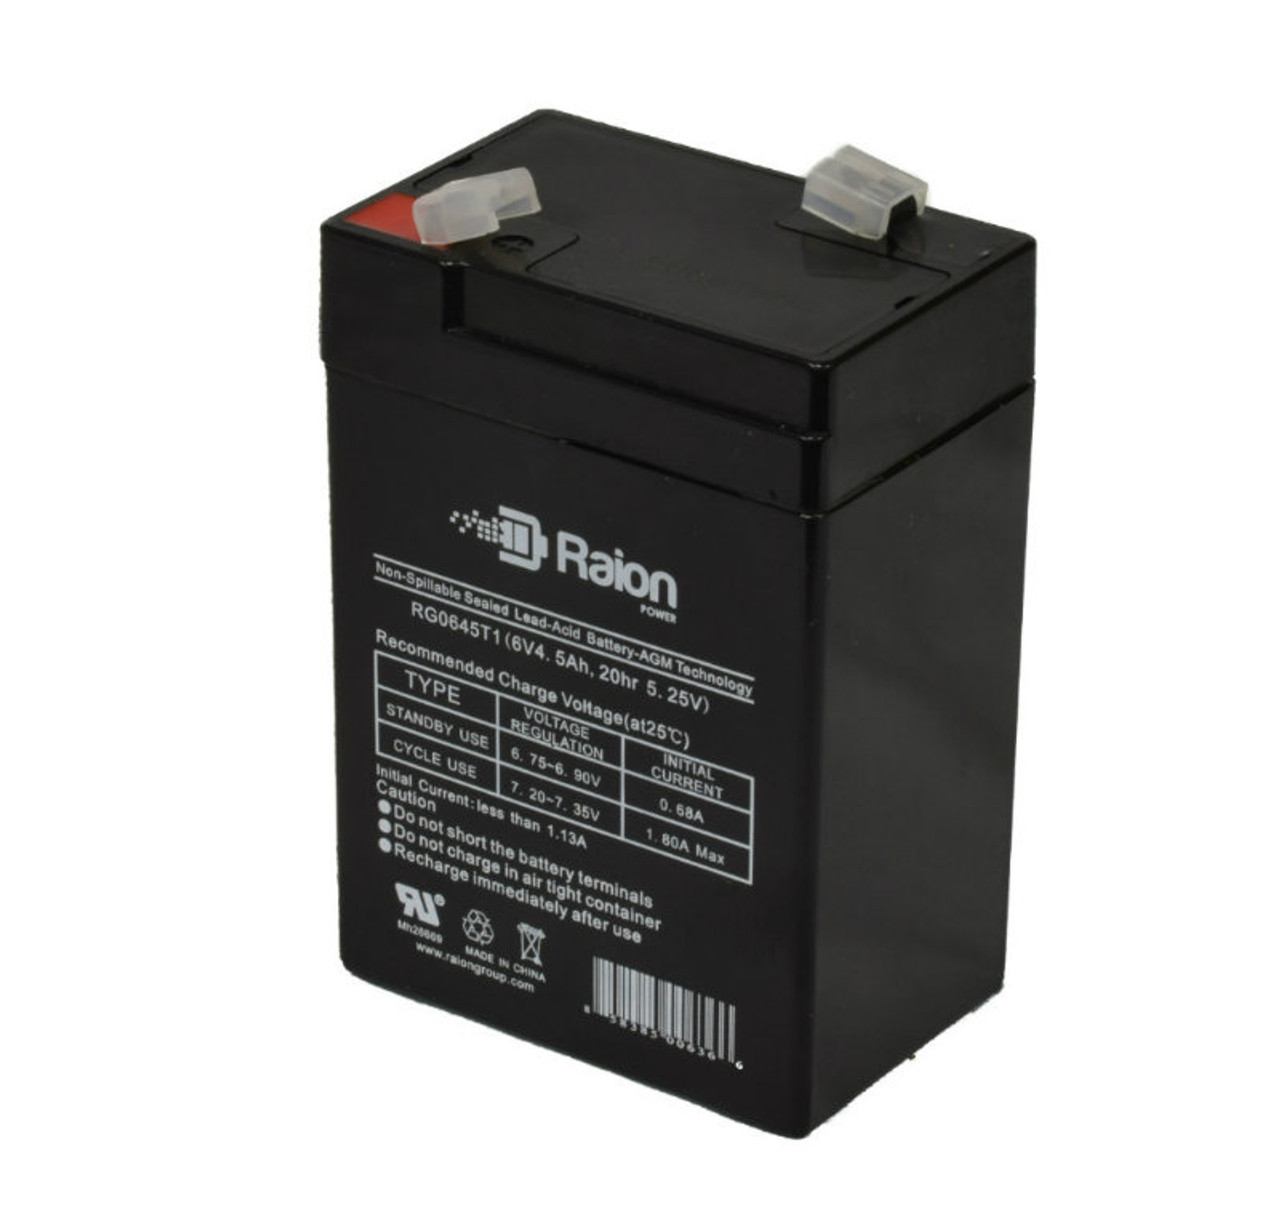 Raion Power RG0645T1 6V 4.5Ah Replacement Battery Cartridge for Long Way LW-3FM4.5A